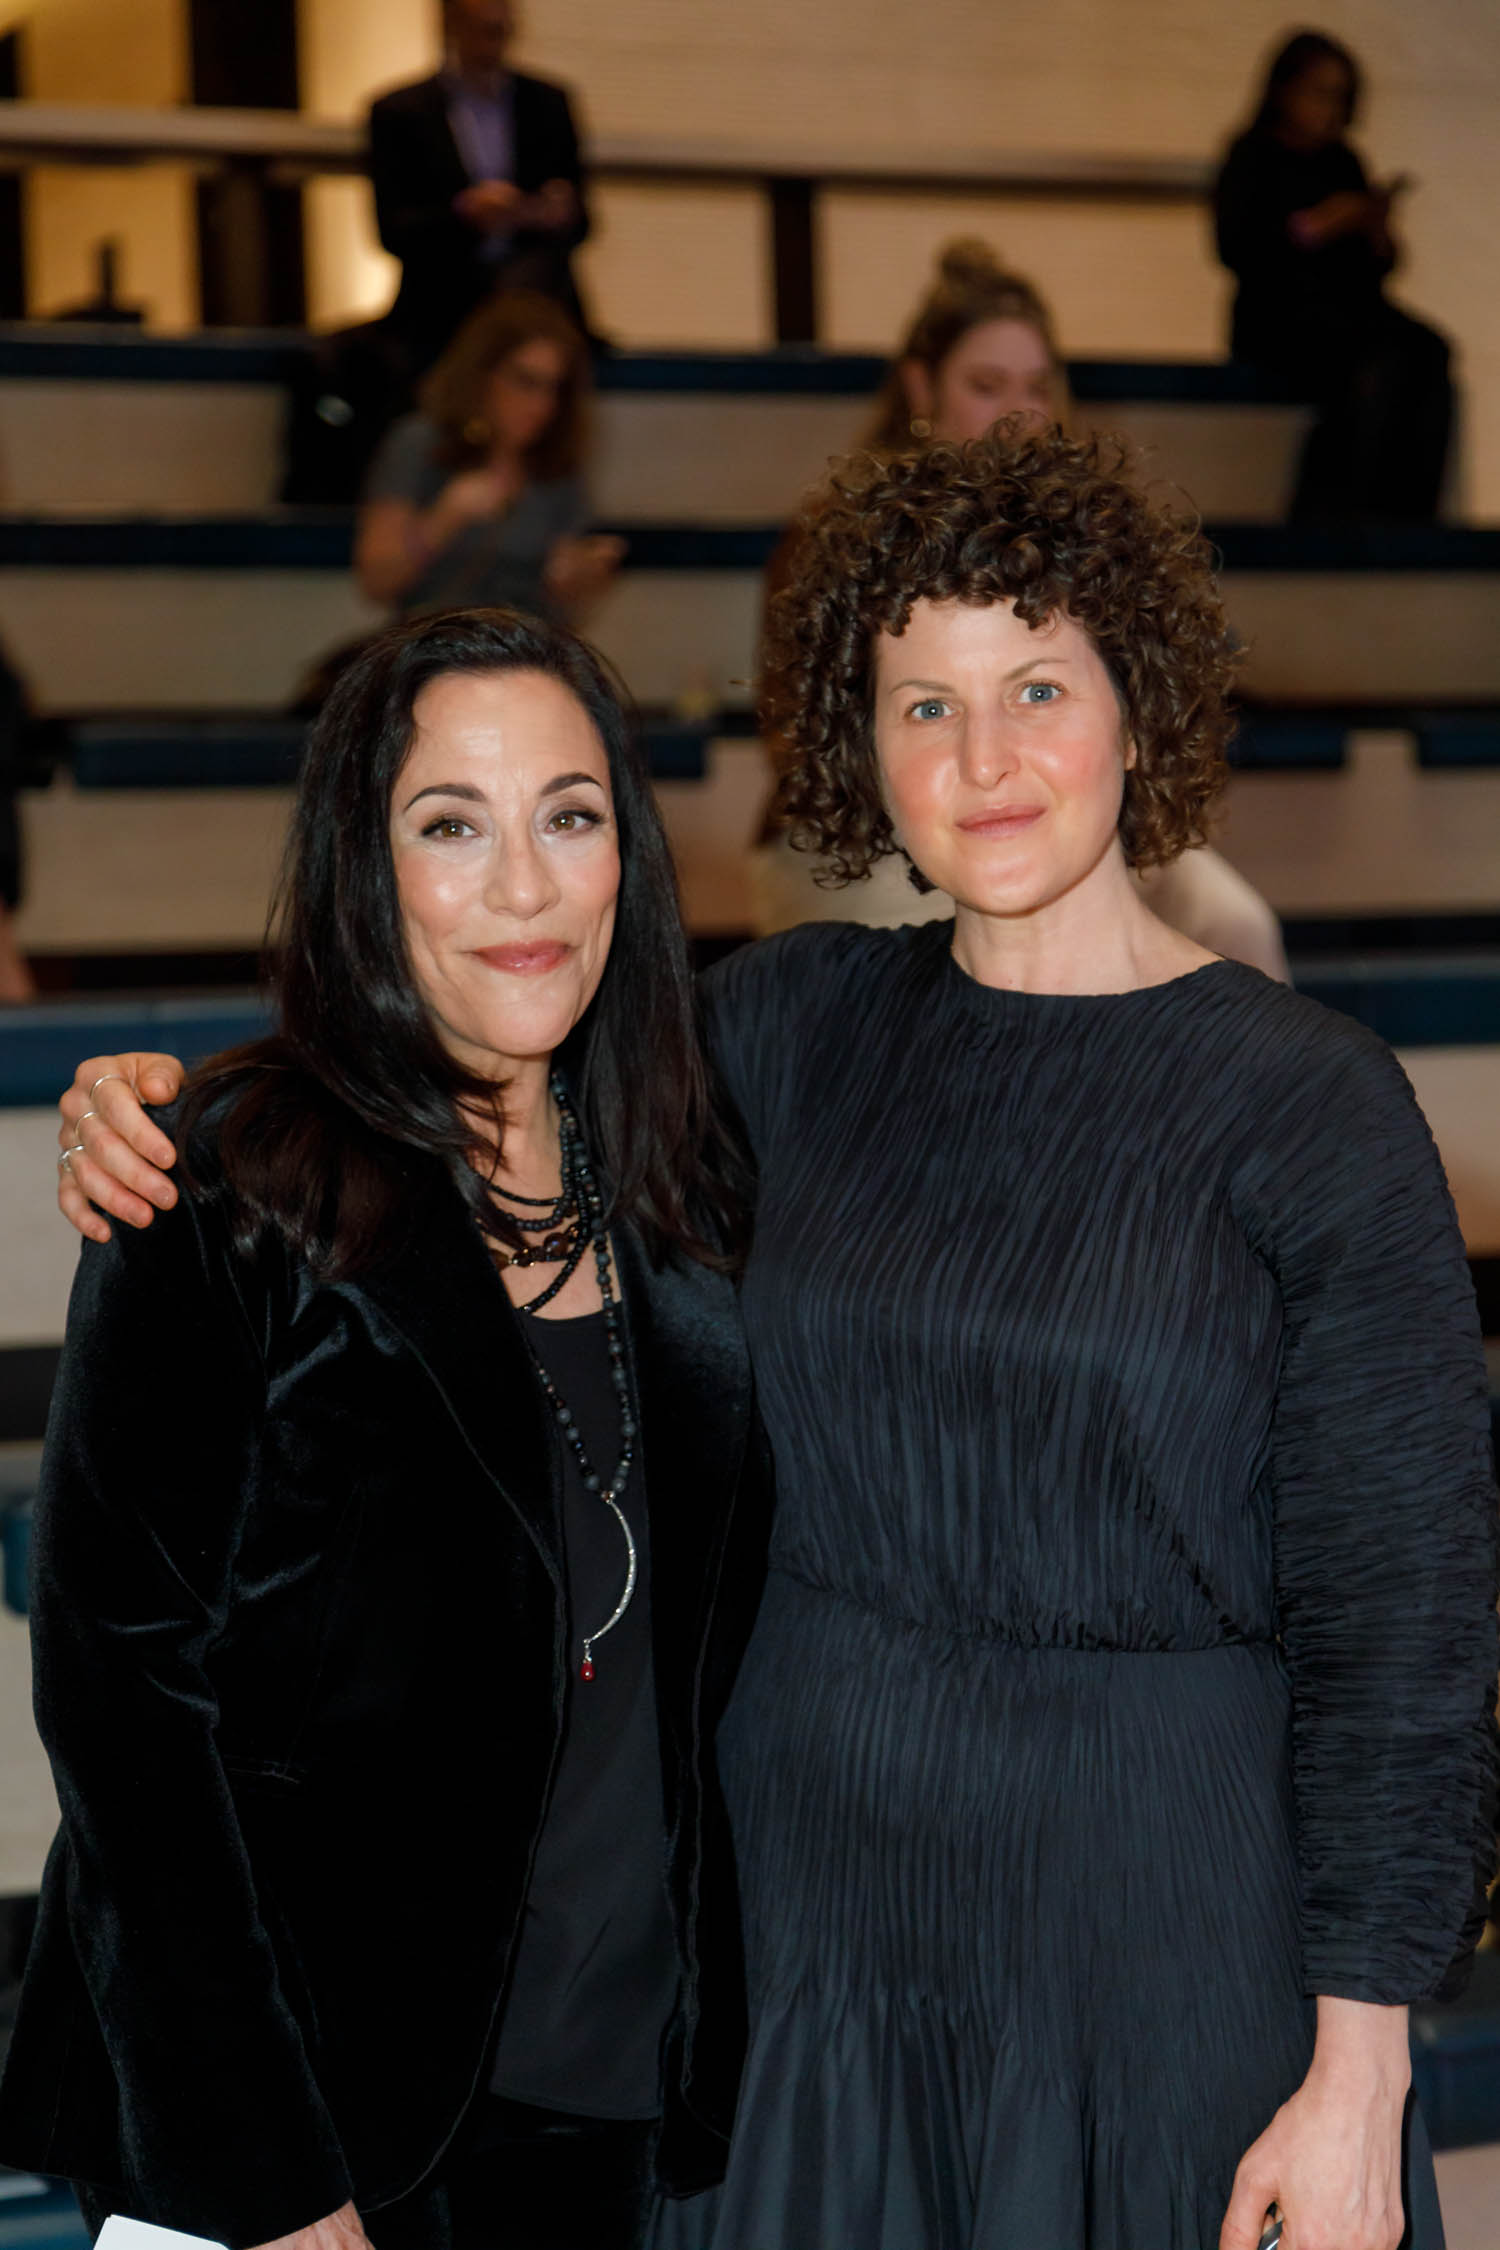 Ilene Shaw, executive director of the NYCxDESIGN festival, with Helene Oberman.